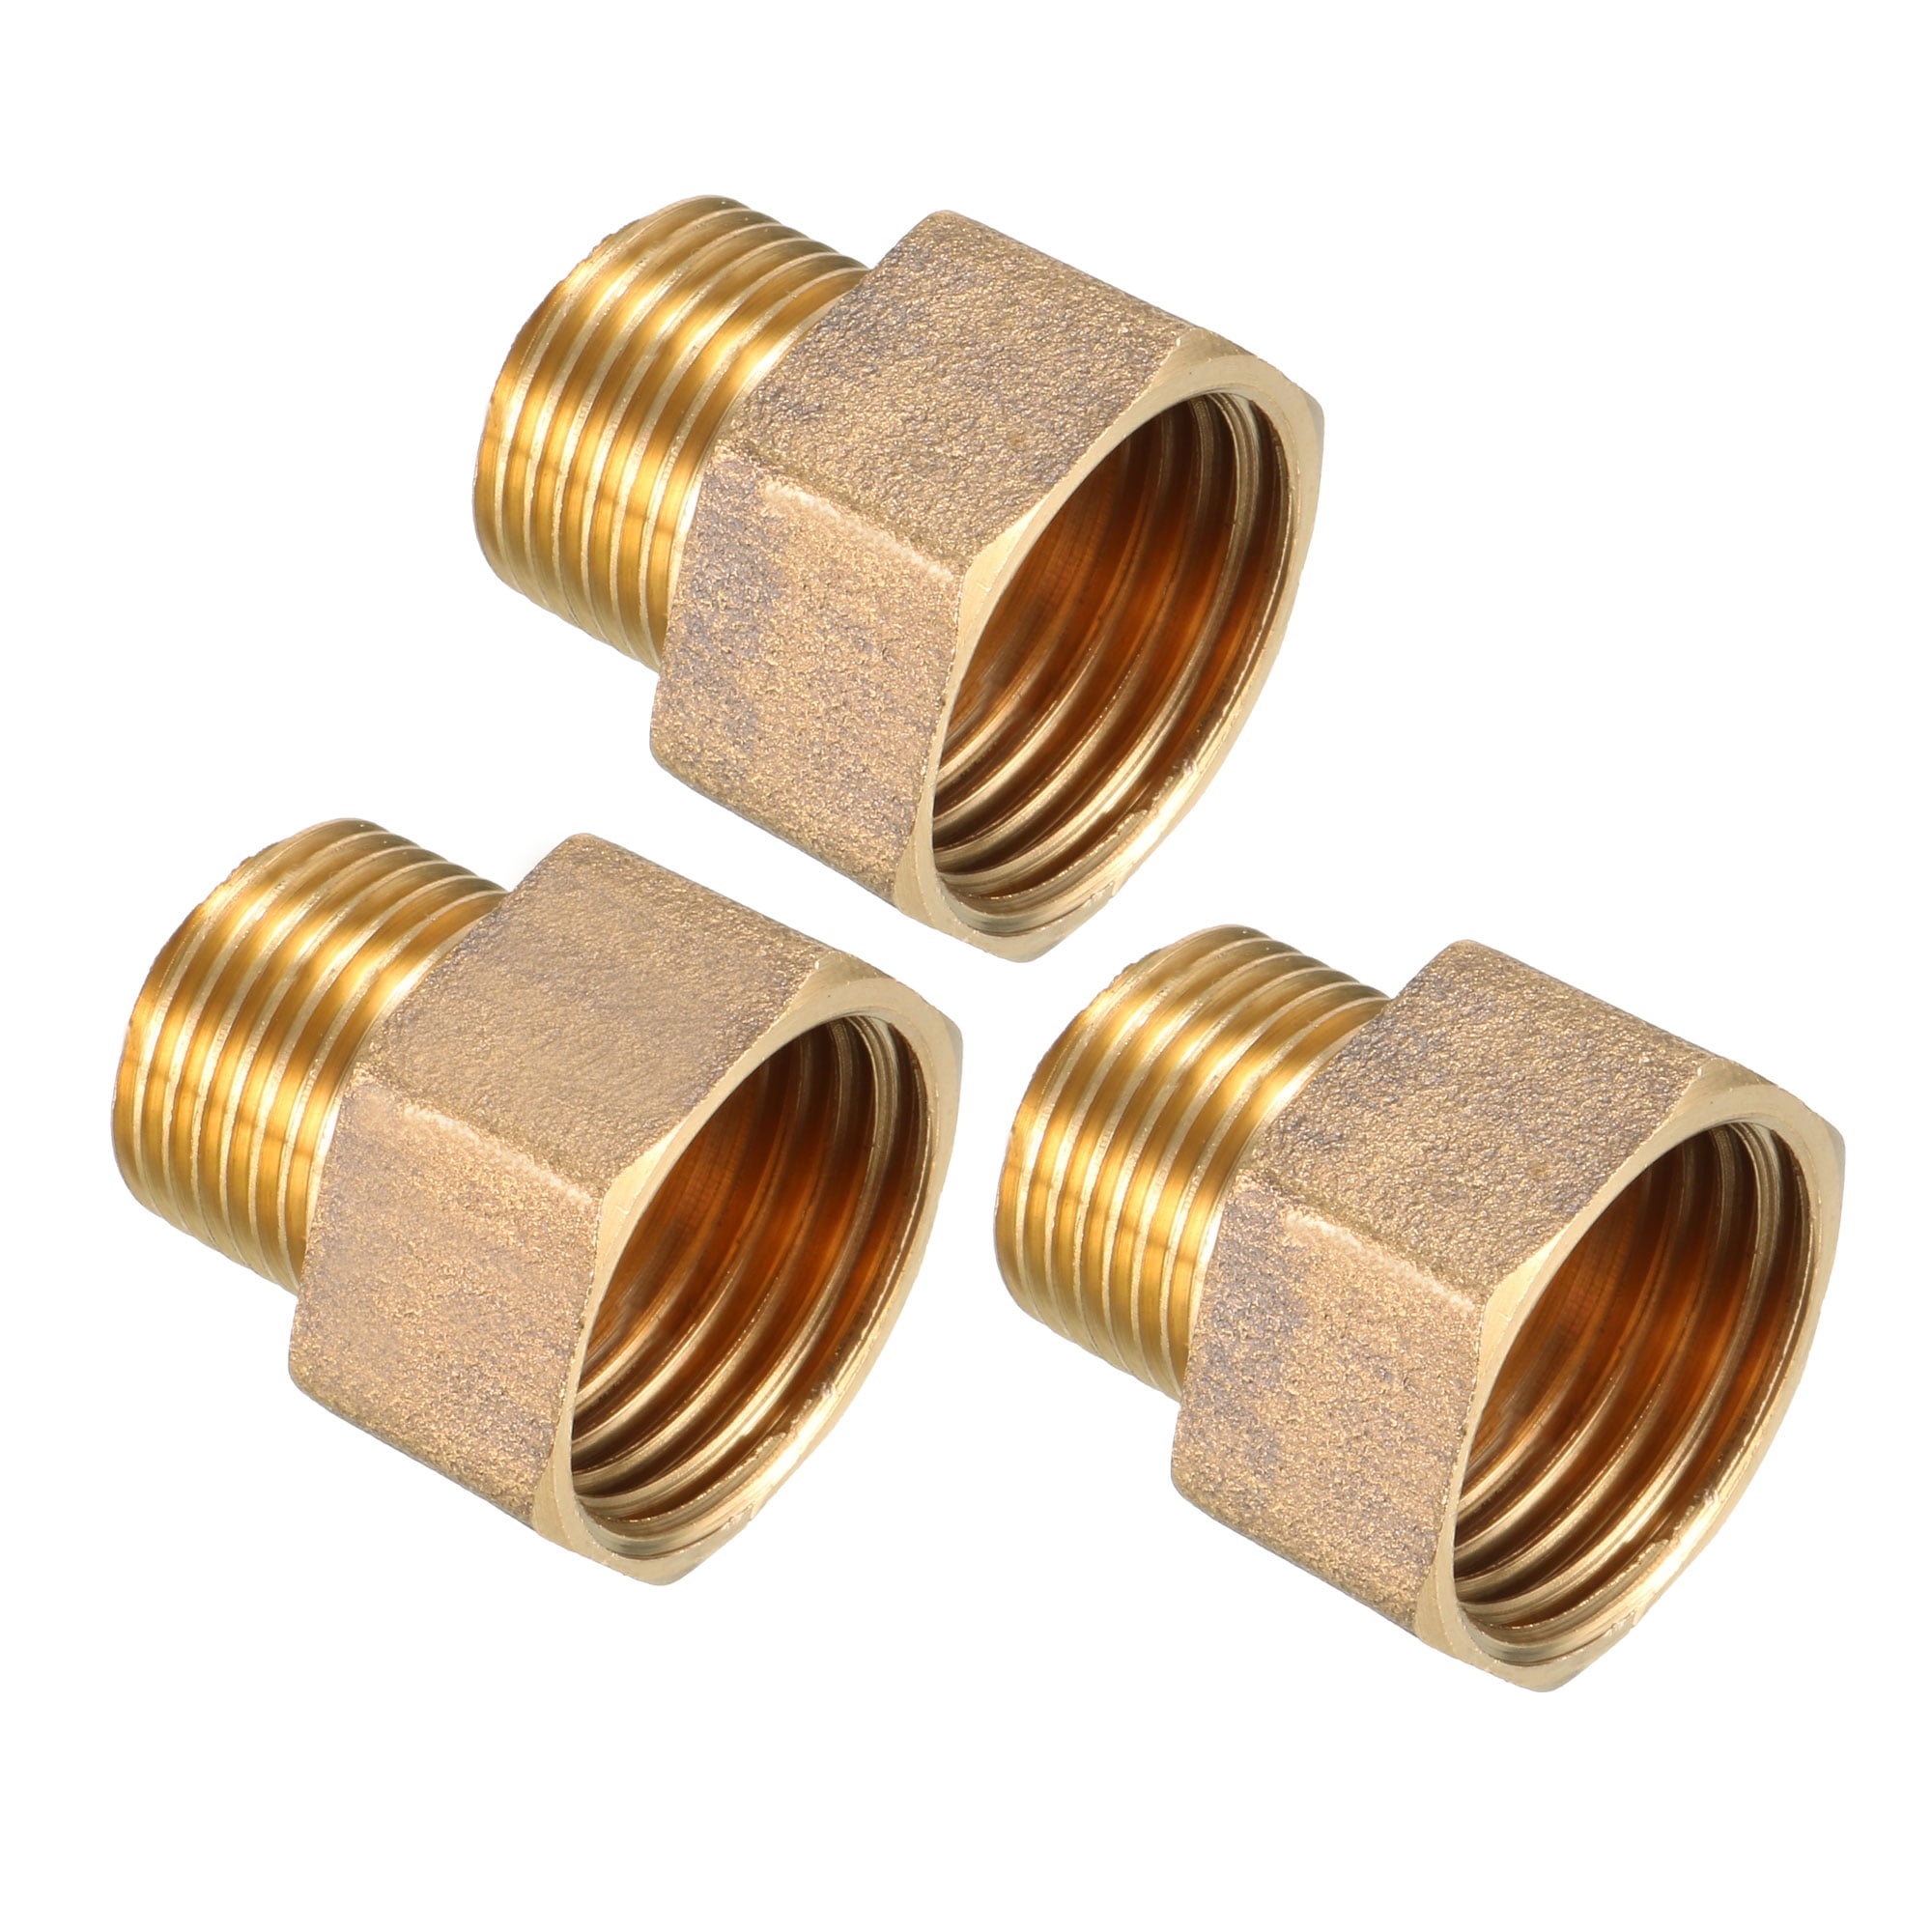 Details about   Pipe Fitting G1/2 Male x G1/2 Female Hex Bushing Adapter 90mm Length 2pcs 